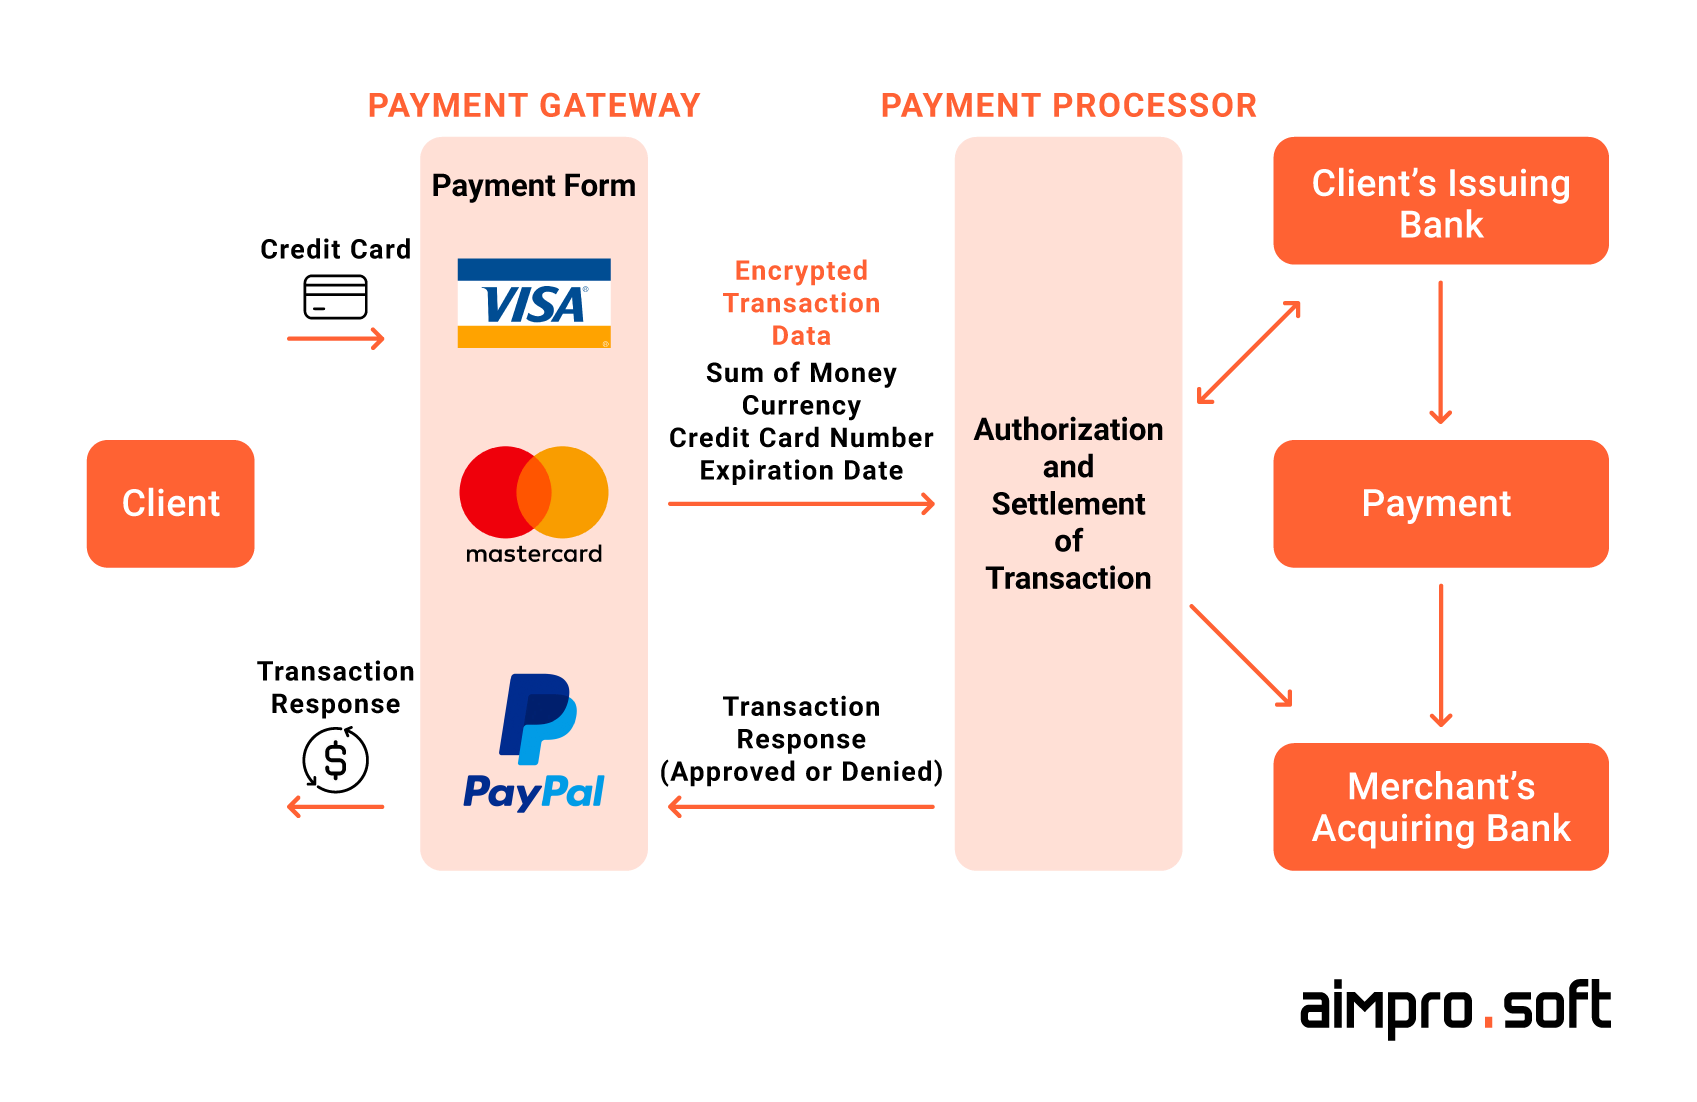 App's payment system